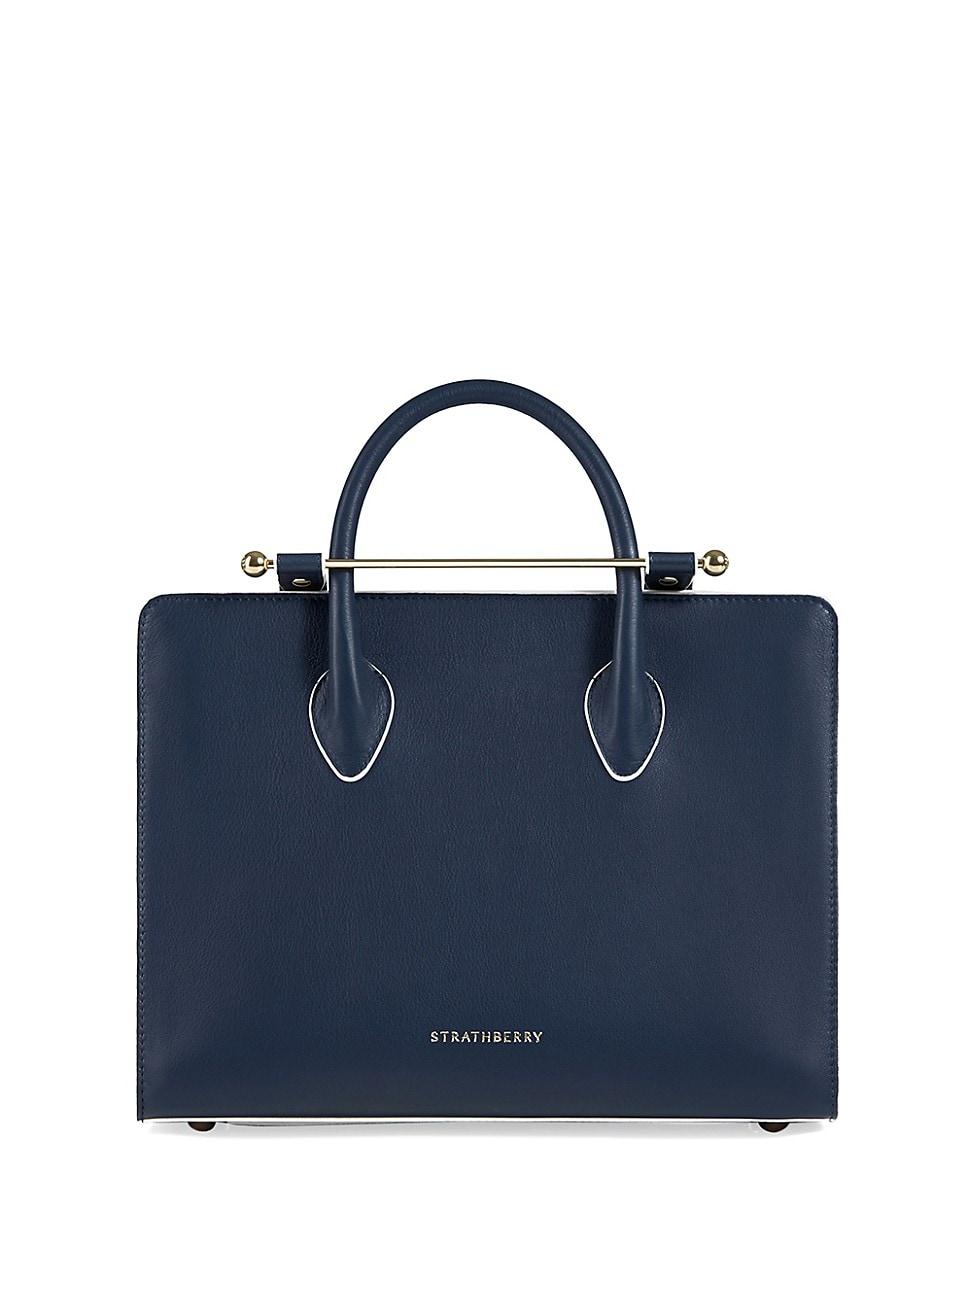 Strathberry Painted Edge Midi Tote in Blue